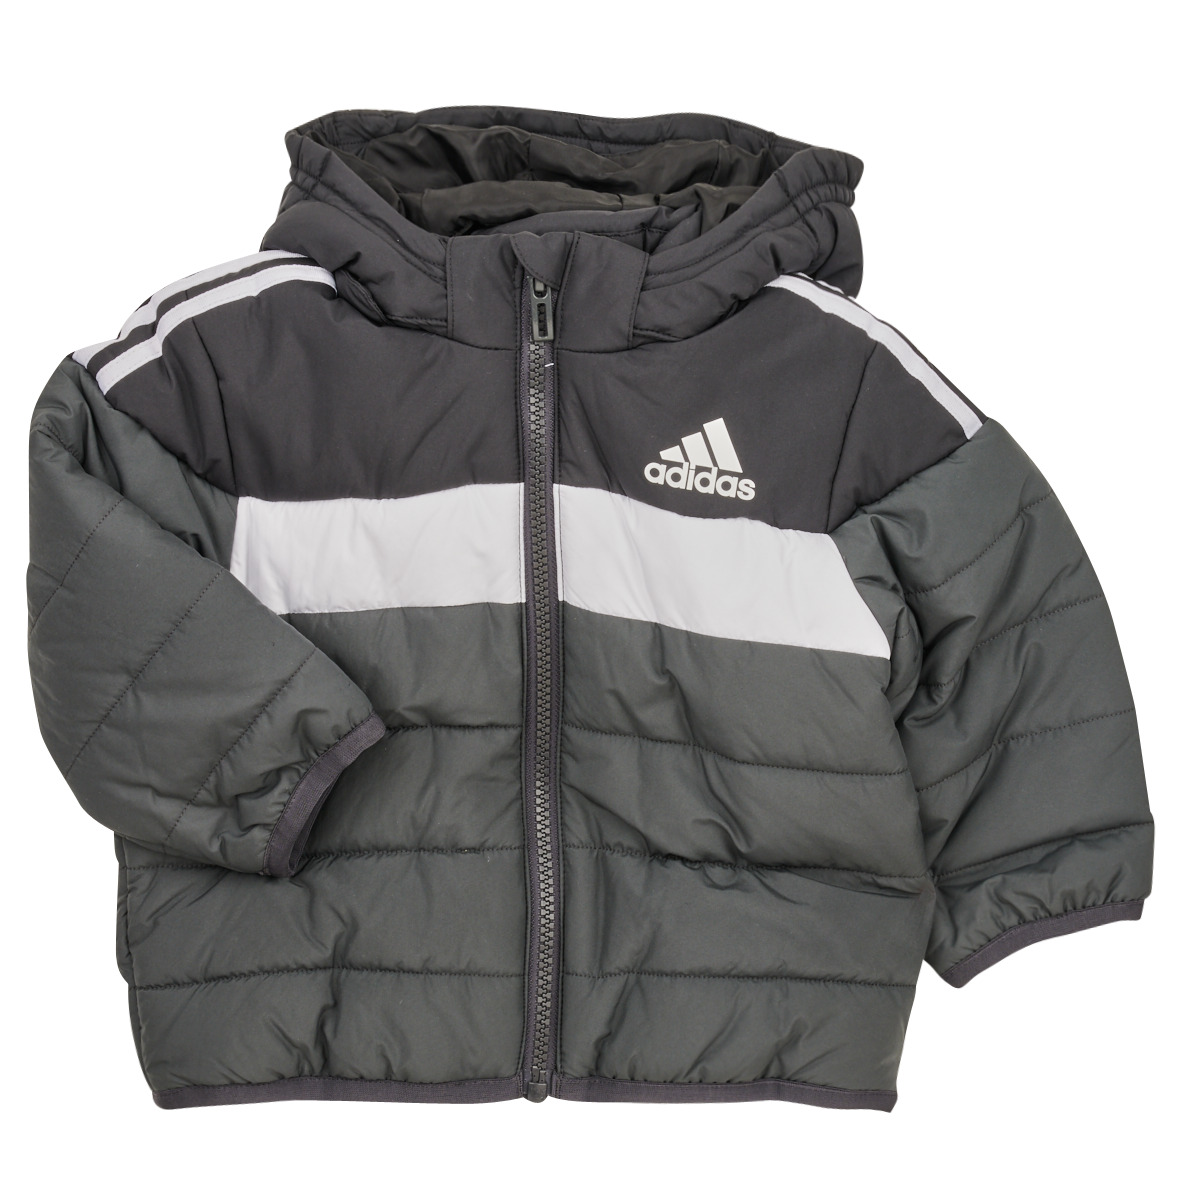 F - Child NET - Clothing Duffel coats Adidas PAD Free ! Spartoo Sportswear JKT | Black delivery IN